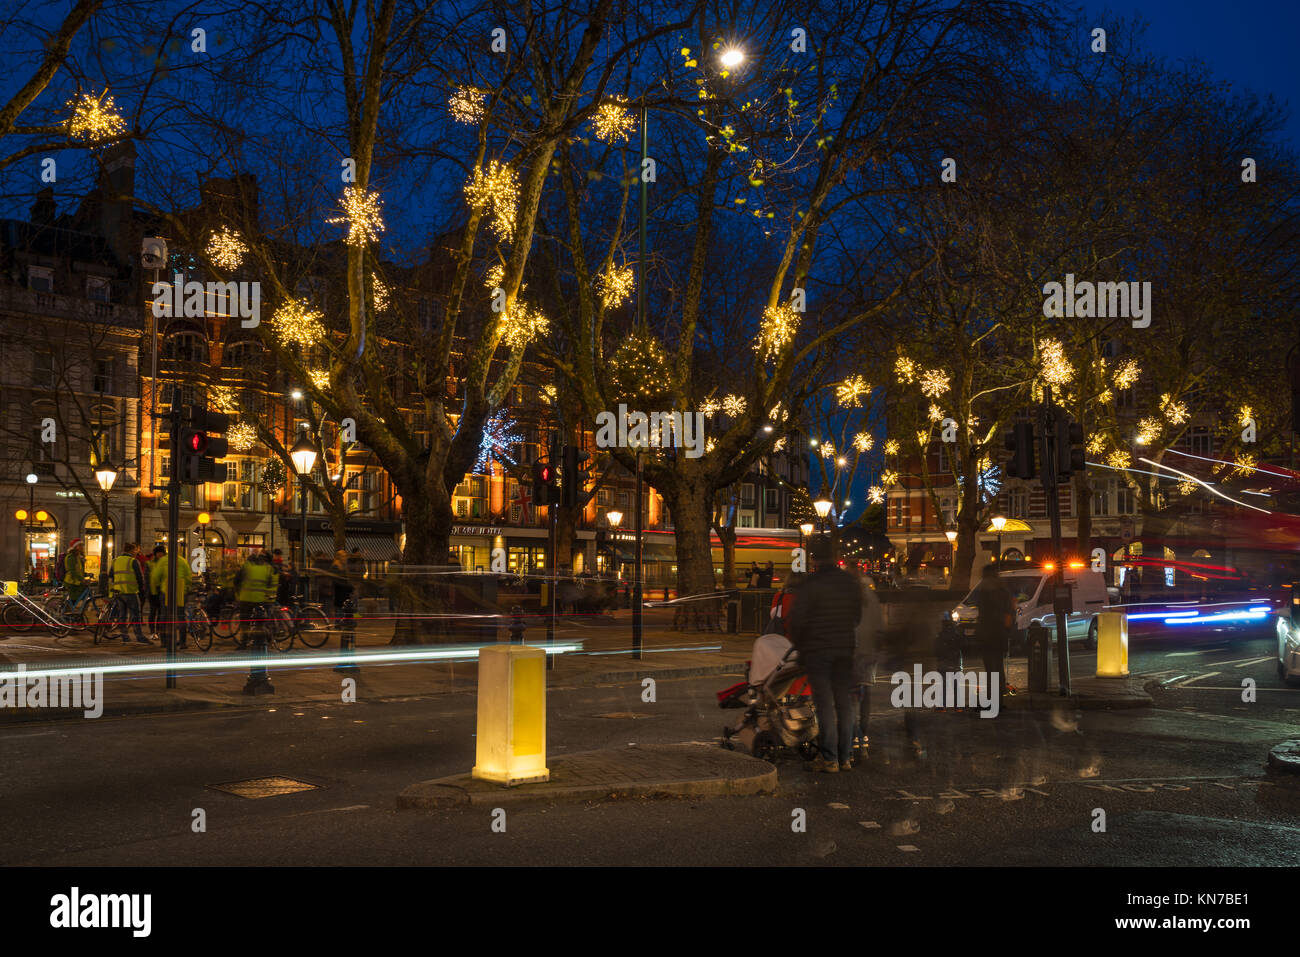 LONDON, UK - DECEMBER 09, 2017: Christmas Lights decorations on Sloane Square - a lovely, fashionable,  pedestrianized area in the Royal Borough of Ke Stock Photo